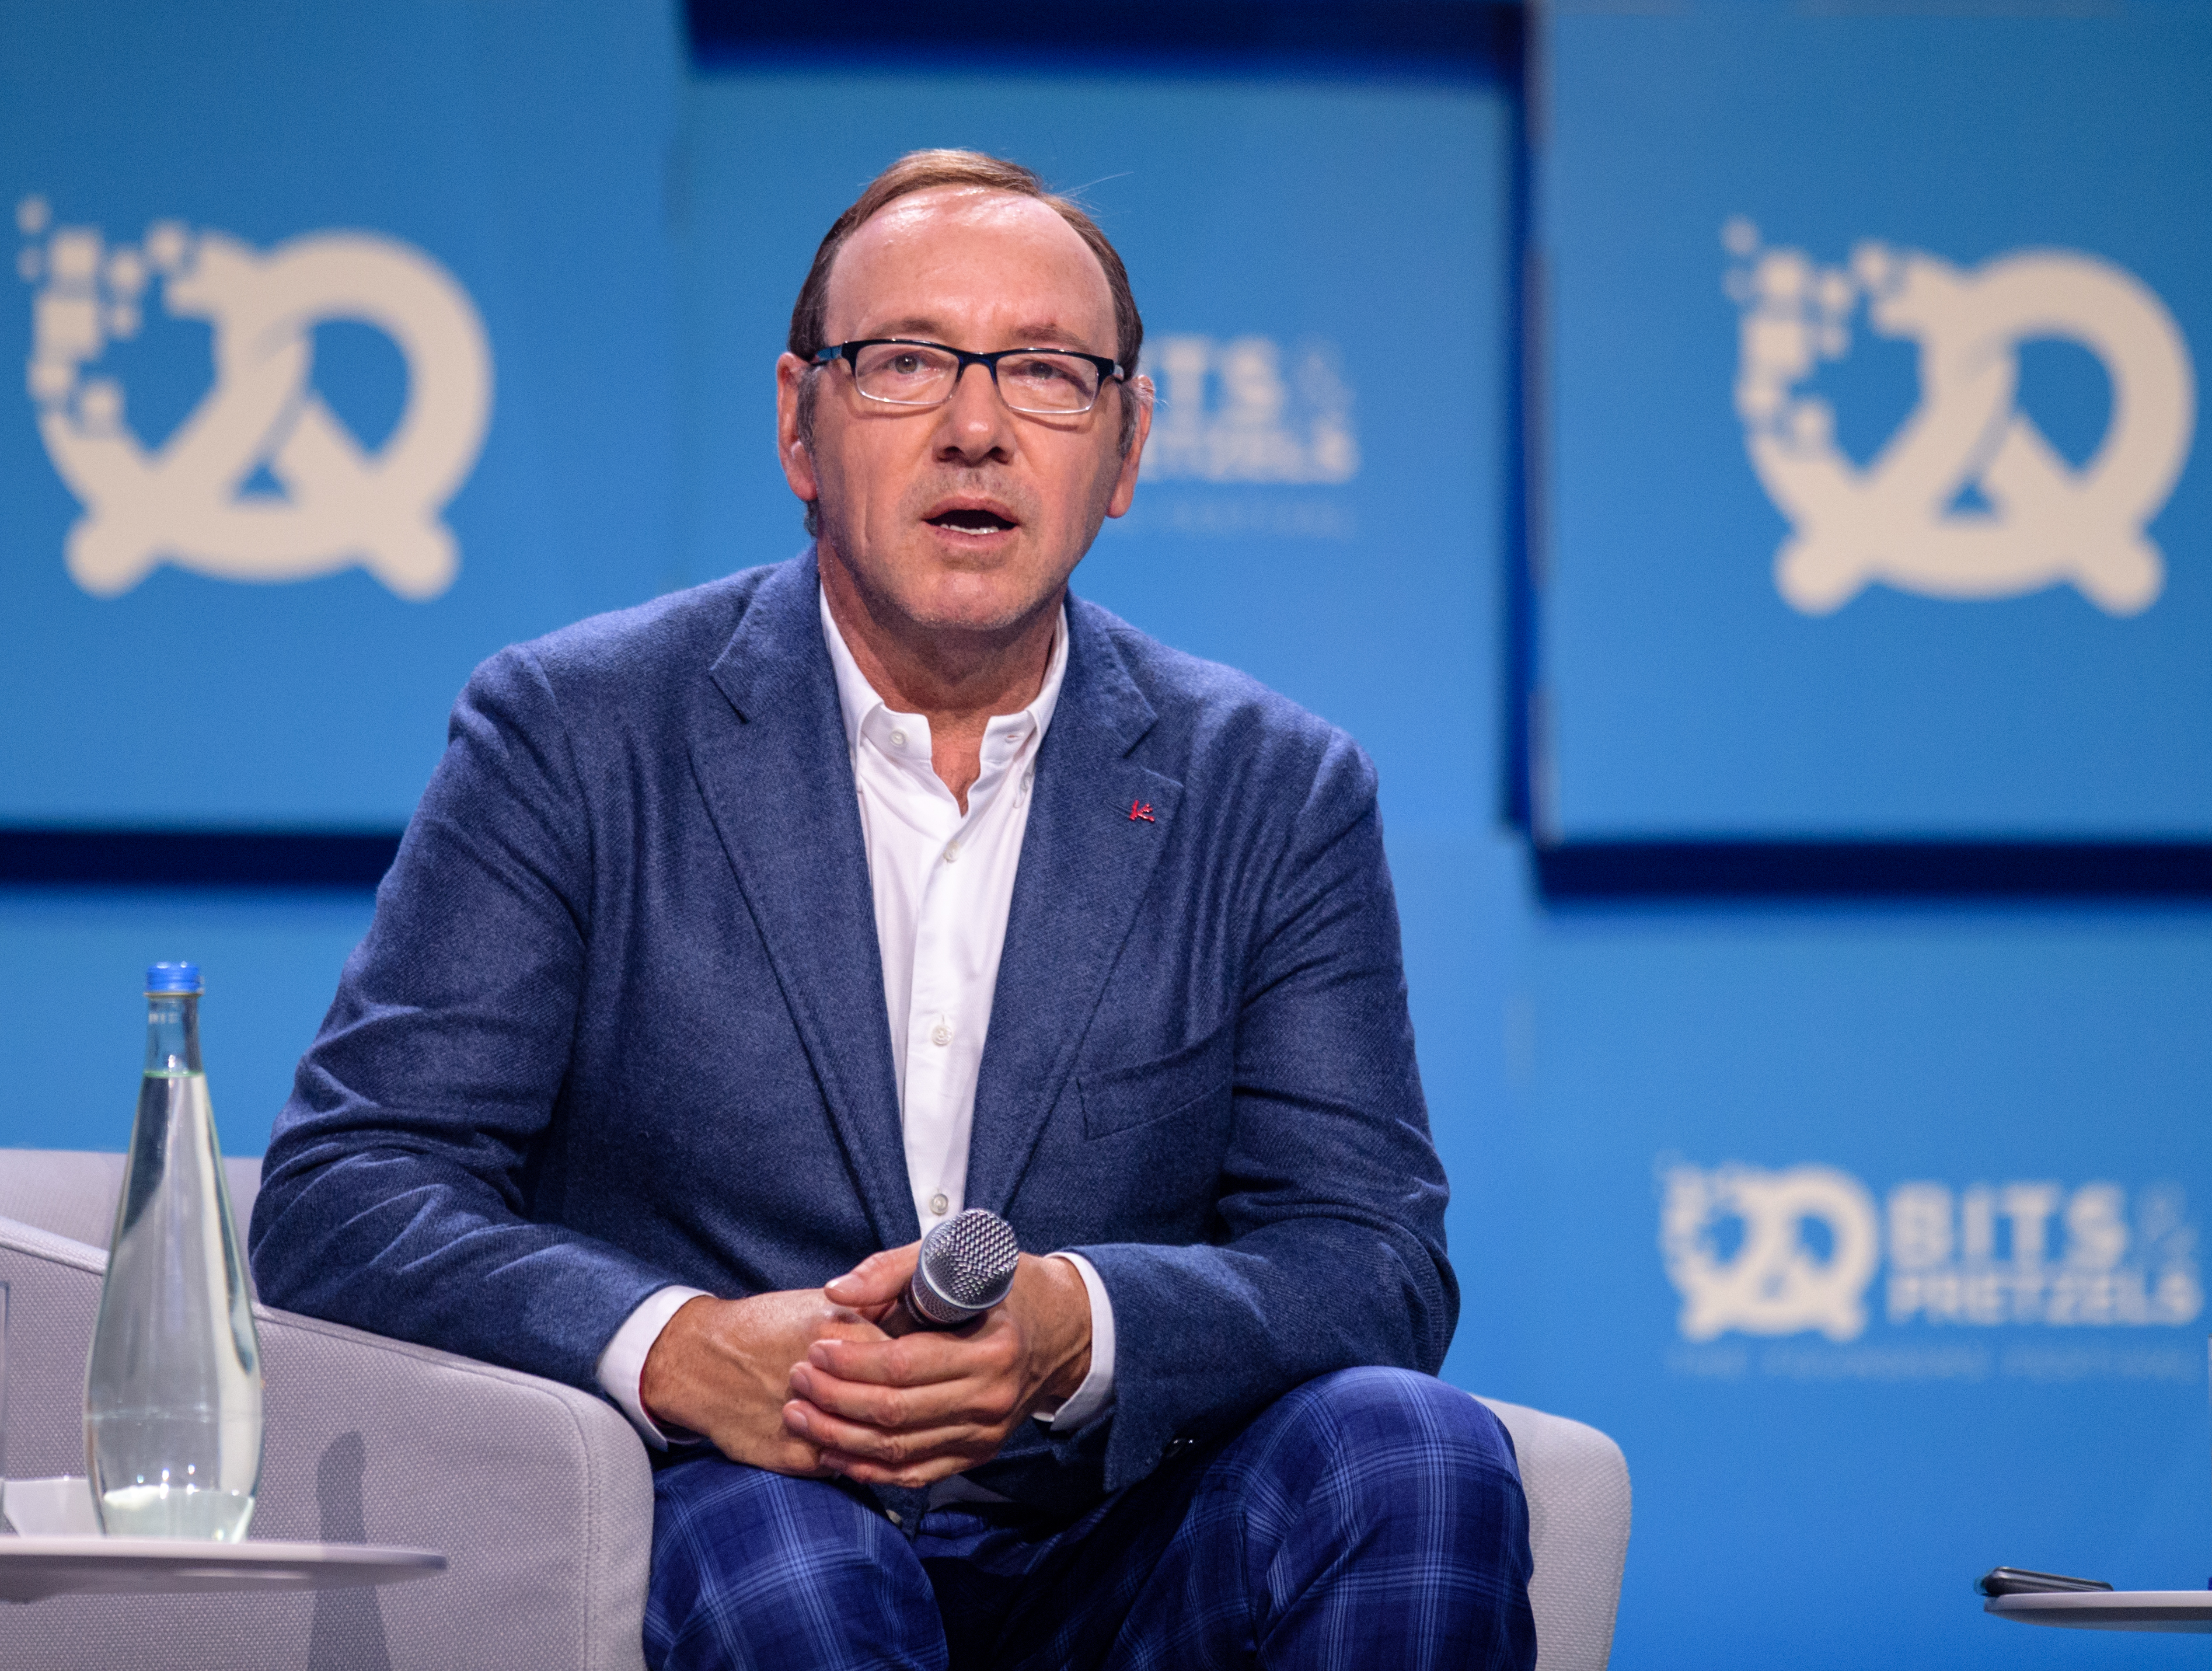 Kevin Spacey speaks at the Bits and Pretzels founders' and investors' festival on September 24, 2017, in Munich, Germany. | Source: Getty Images